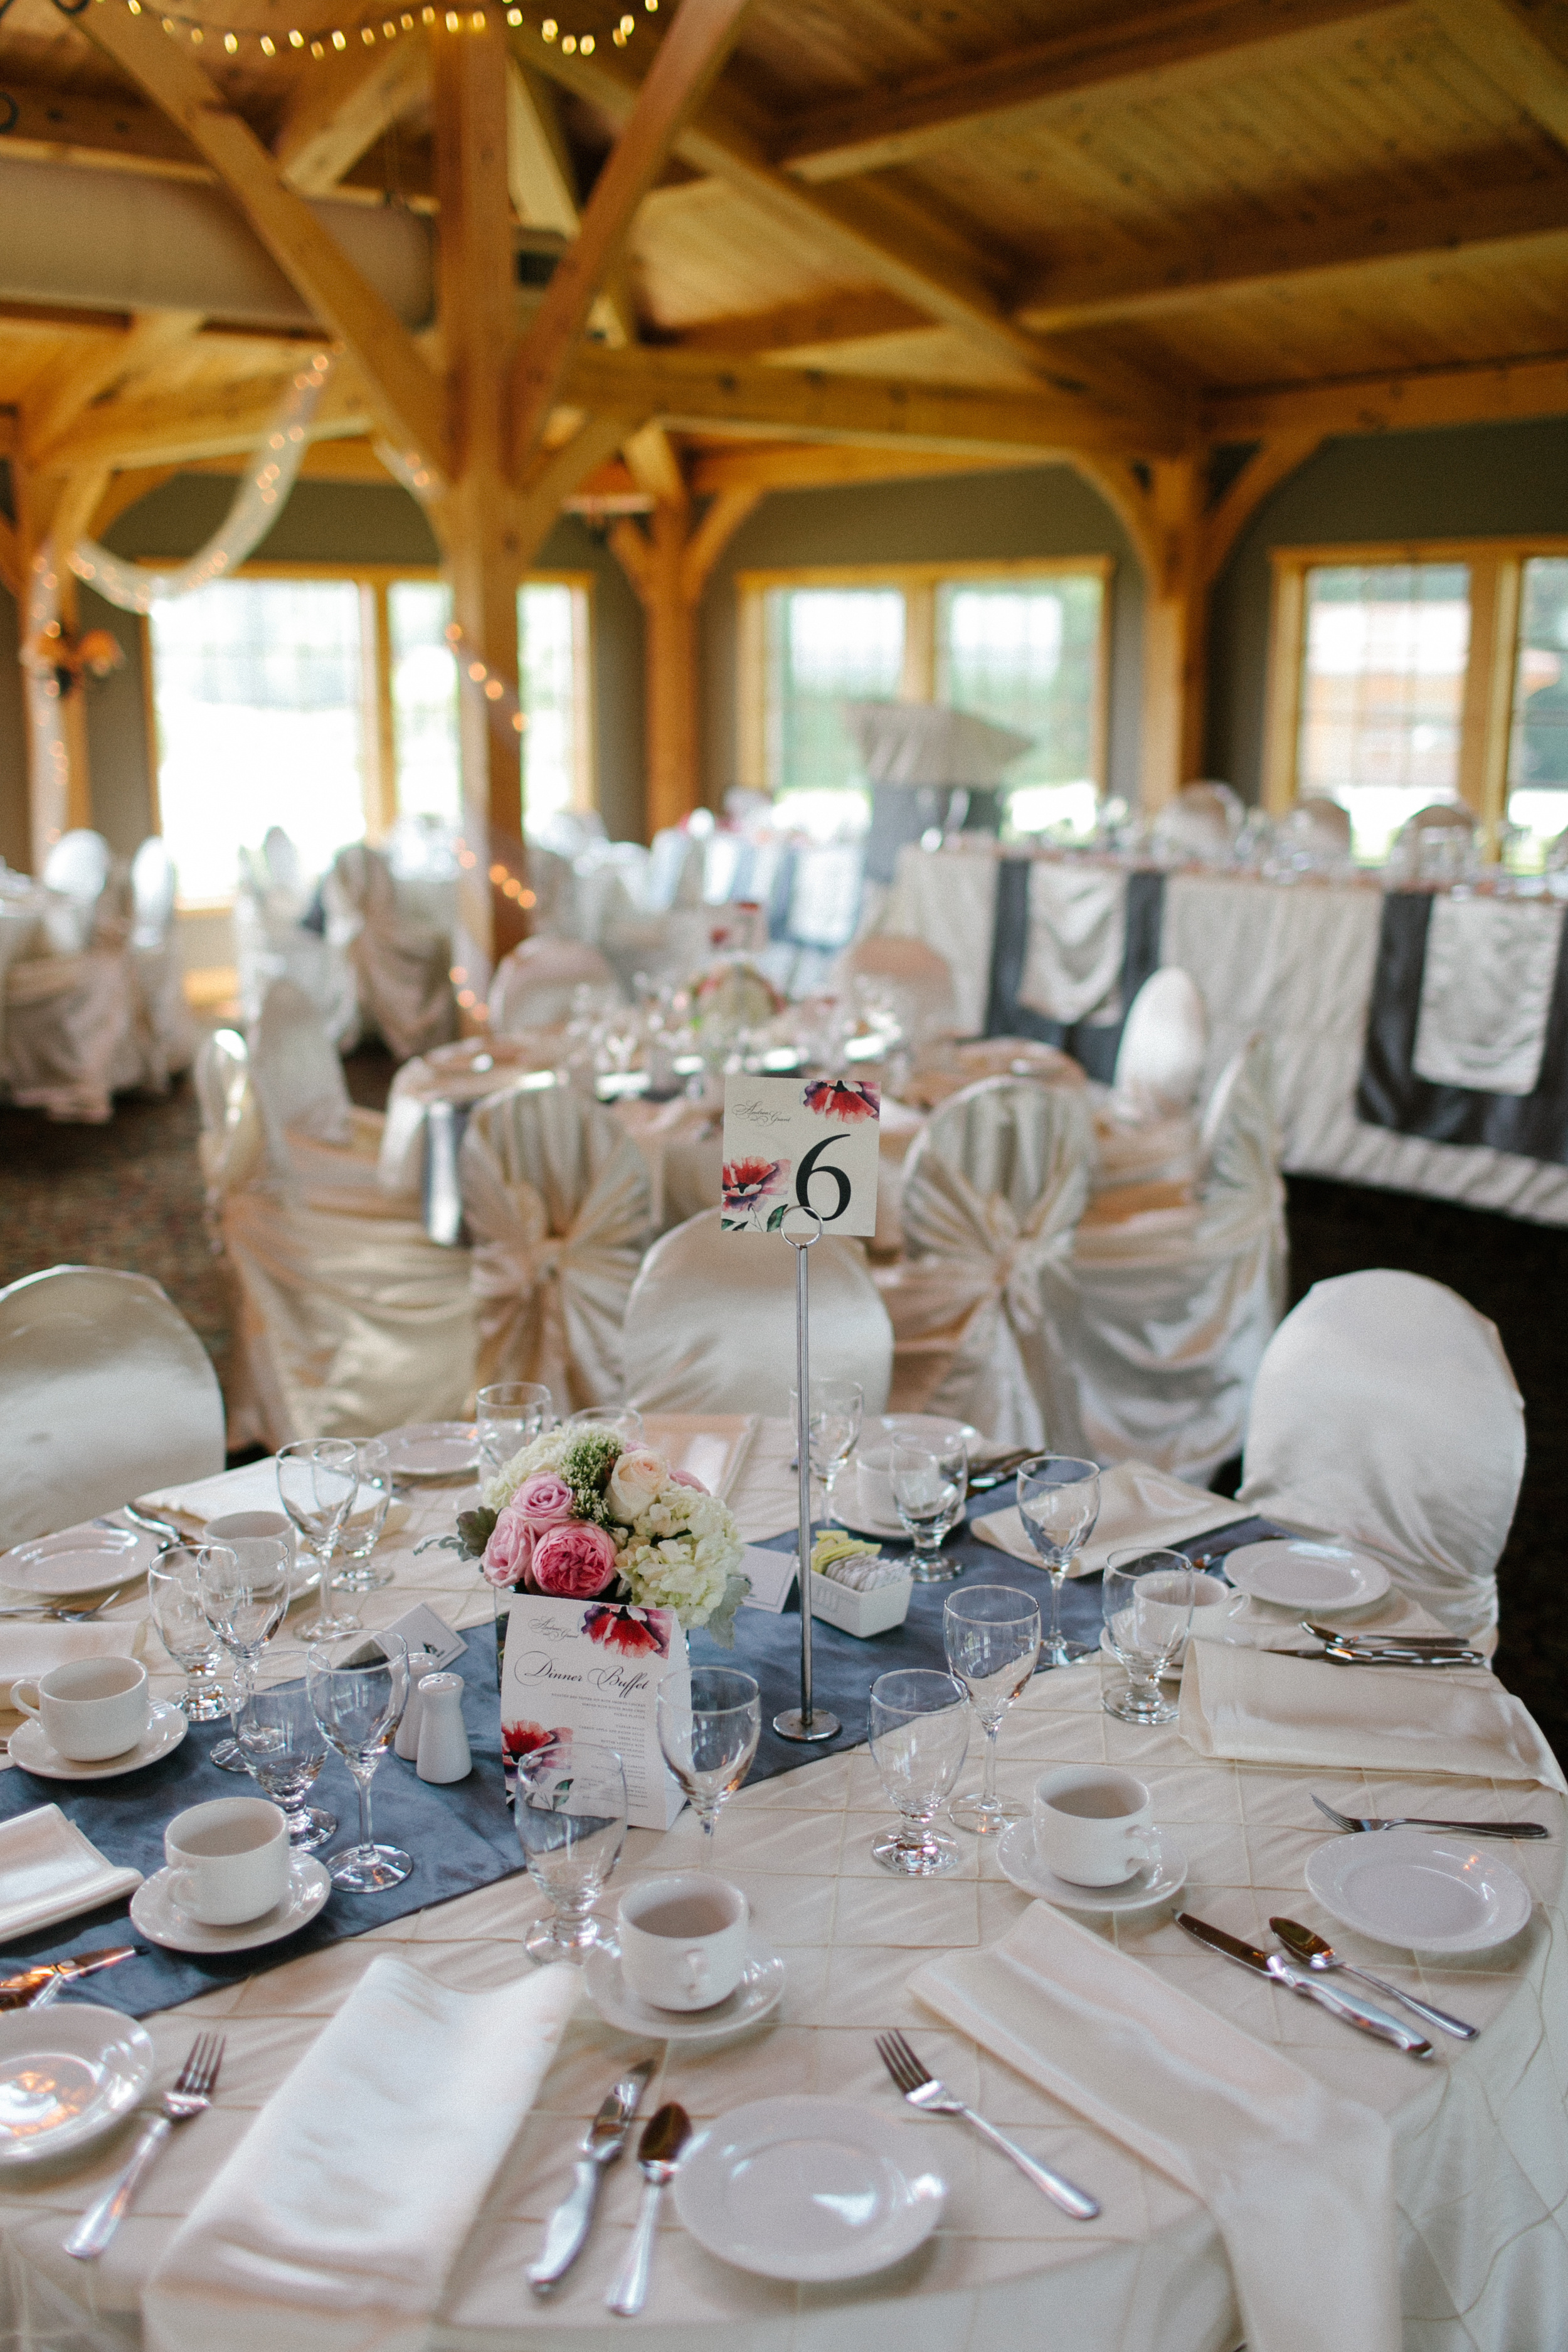  Elegant Table Setting for a Canadian Wedding | photo by blf Studios | wedding by Madeline's Weddings 